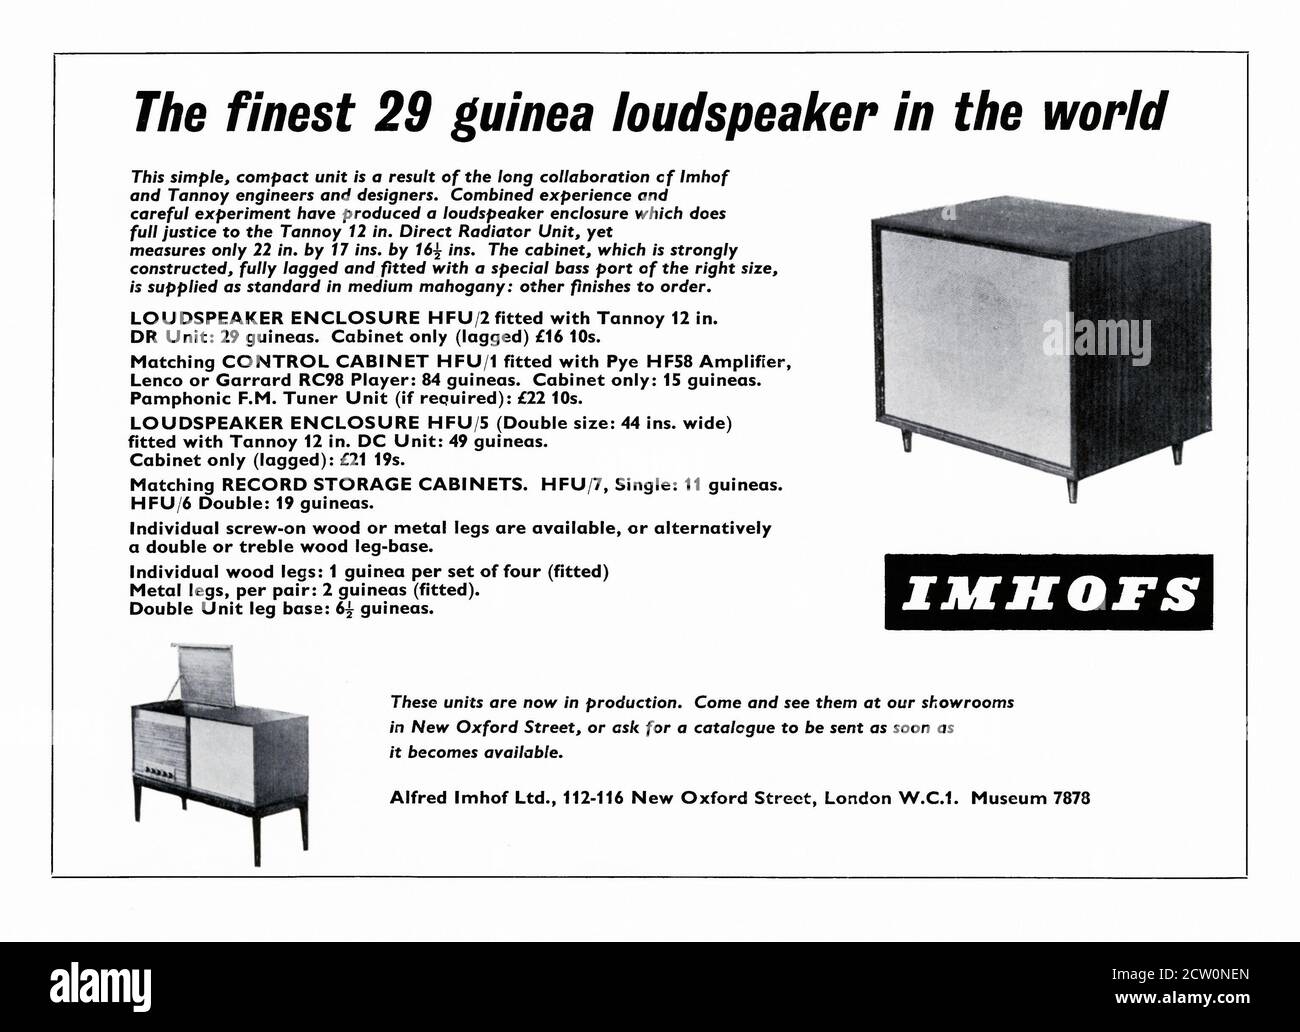 An old advert for Imhofs hi-fi equipment. The photographs show a loudspeaker and a cabinet with a speaker, record player, radio tuner and amplifier within (often called a radiogram). Imhofs were a well-regarded company in home audio equipment and had a large showroom in New Oxford Street, London, England, UK. The advert appeared in a magazine published in the UK in 1956 – vintage 1950s graphics. Stock Photo